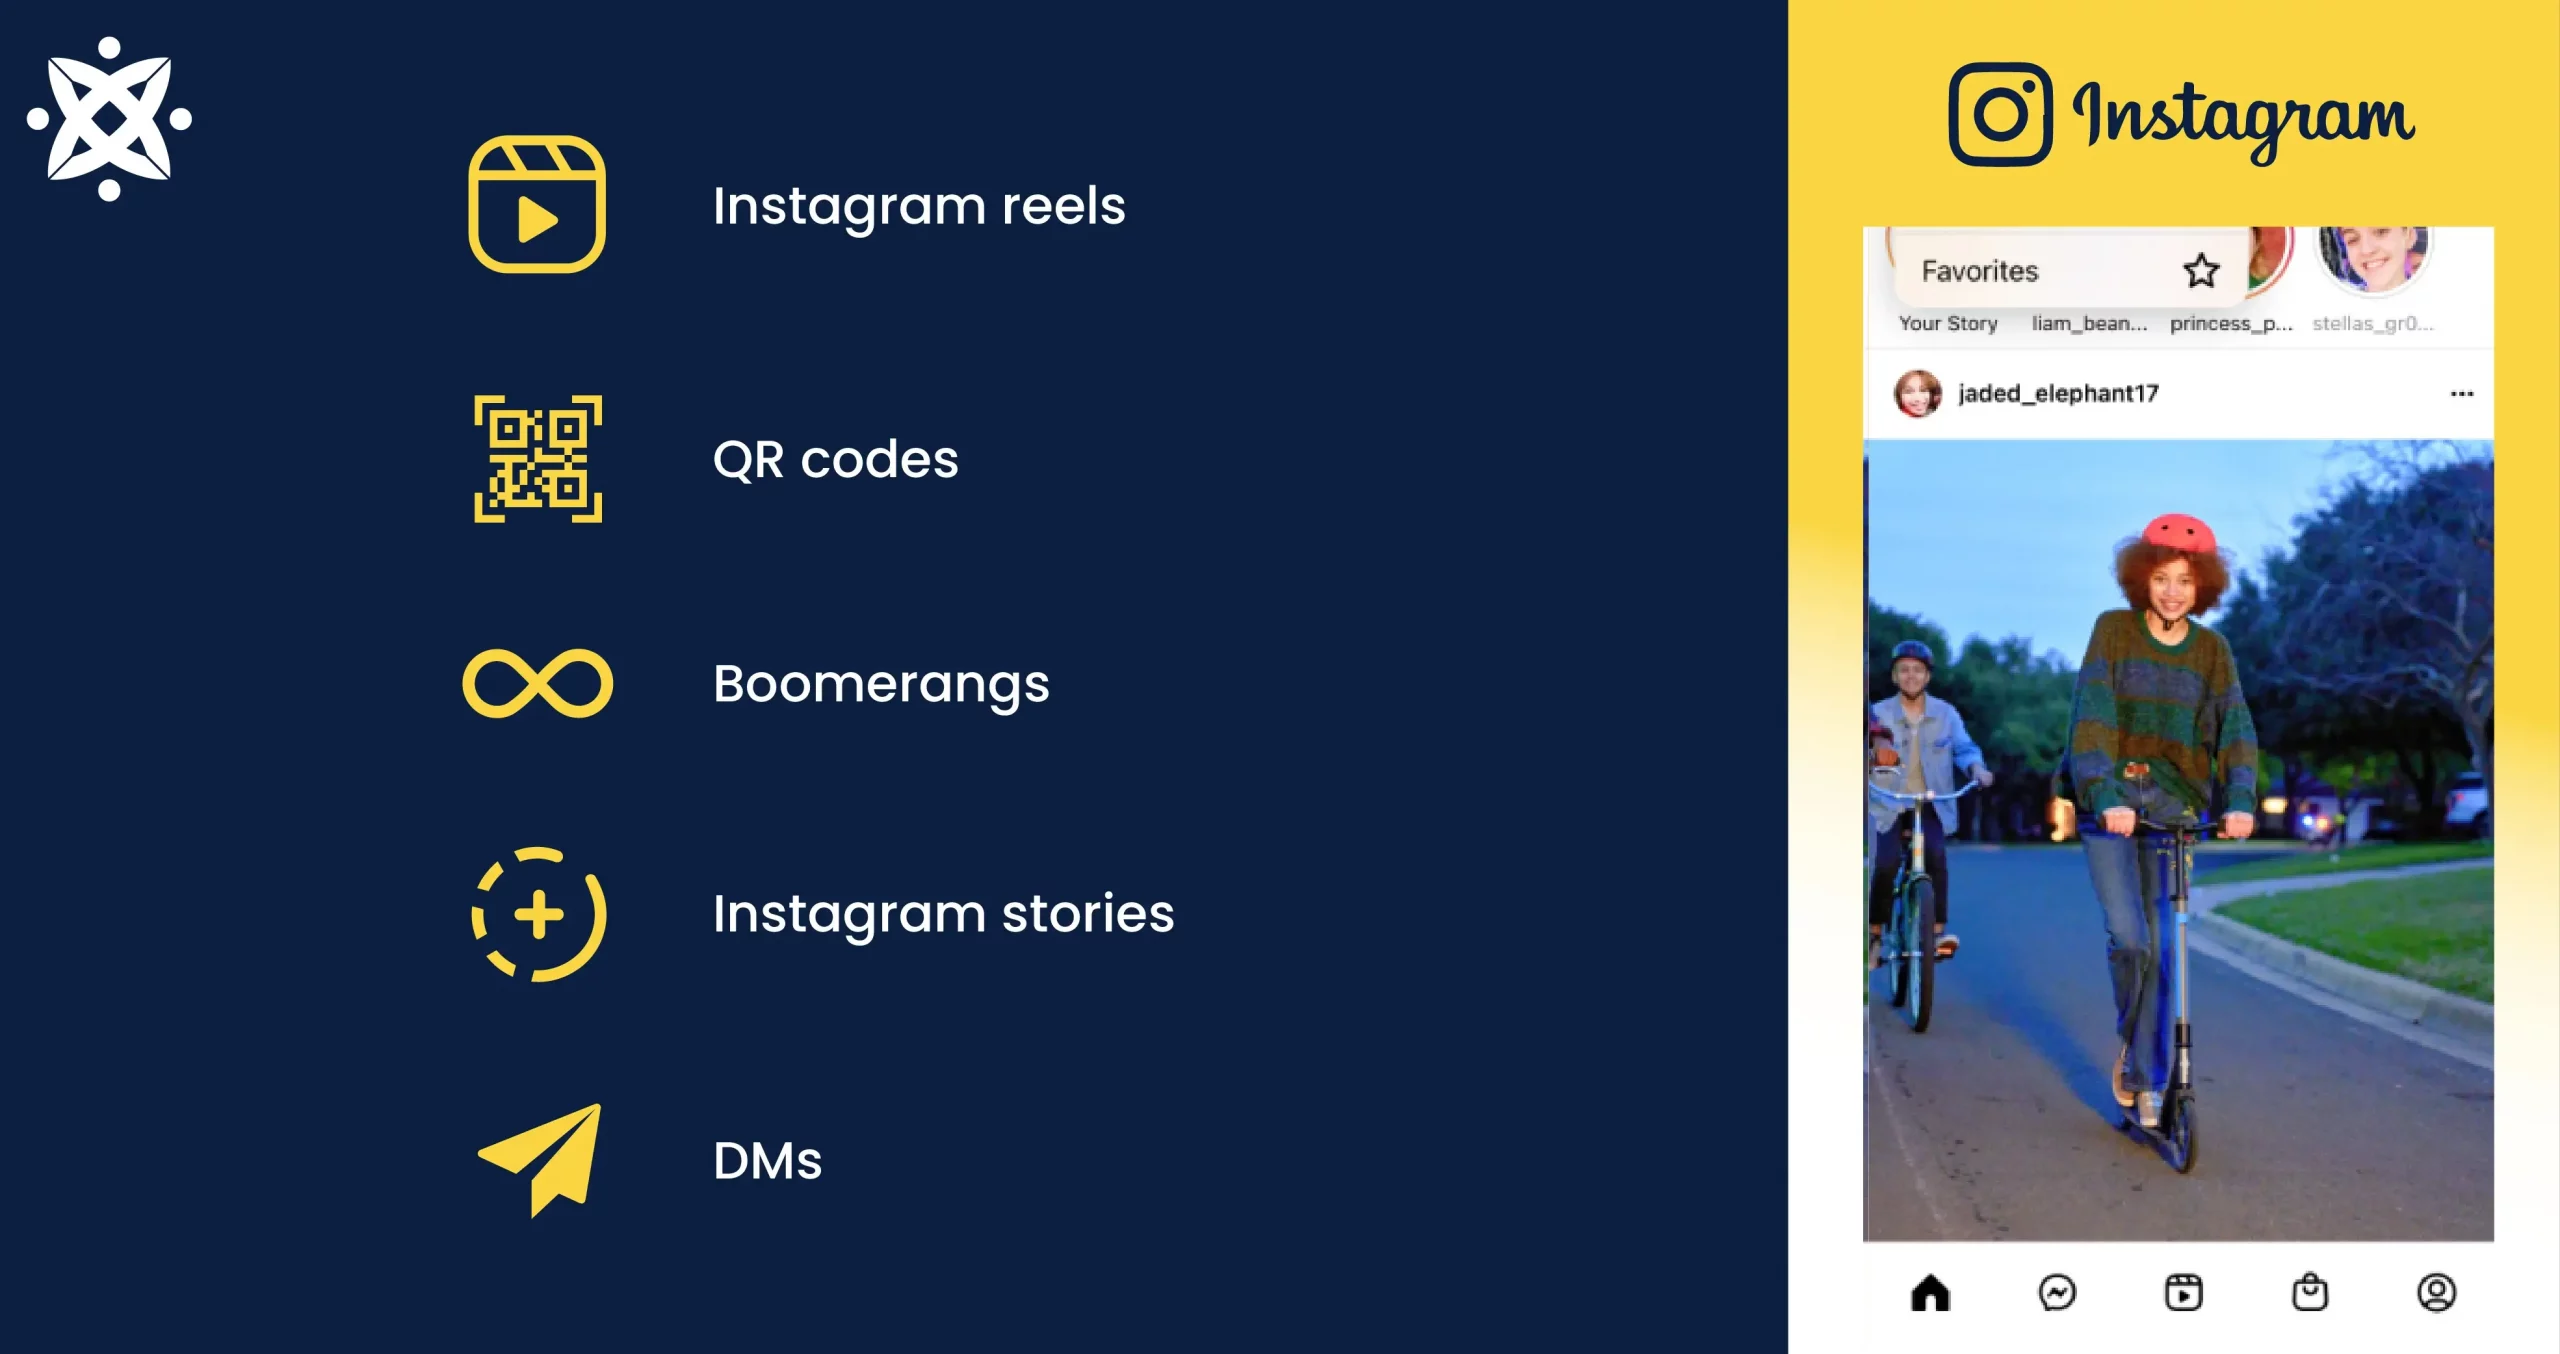 Graphic showing Instagram Social Media Mobile App's Mockup with its core functionalities/features